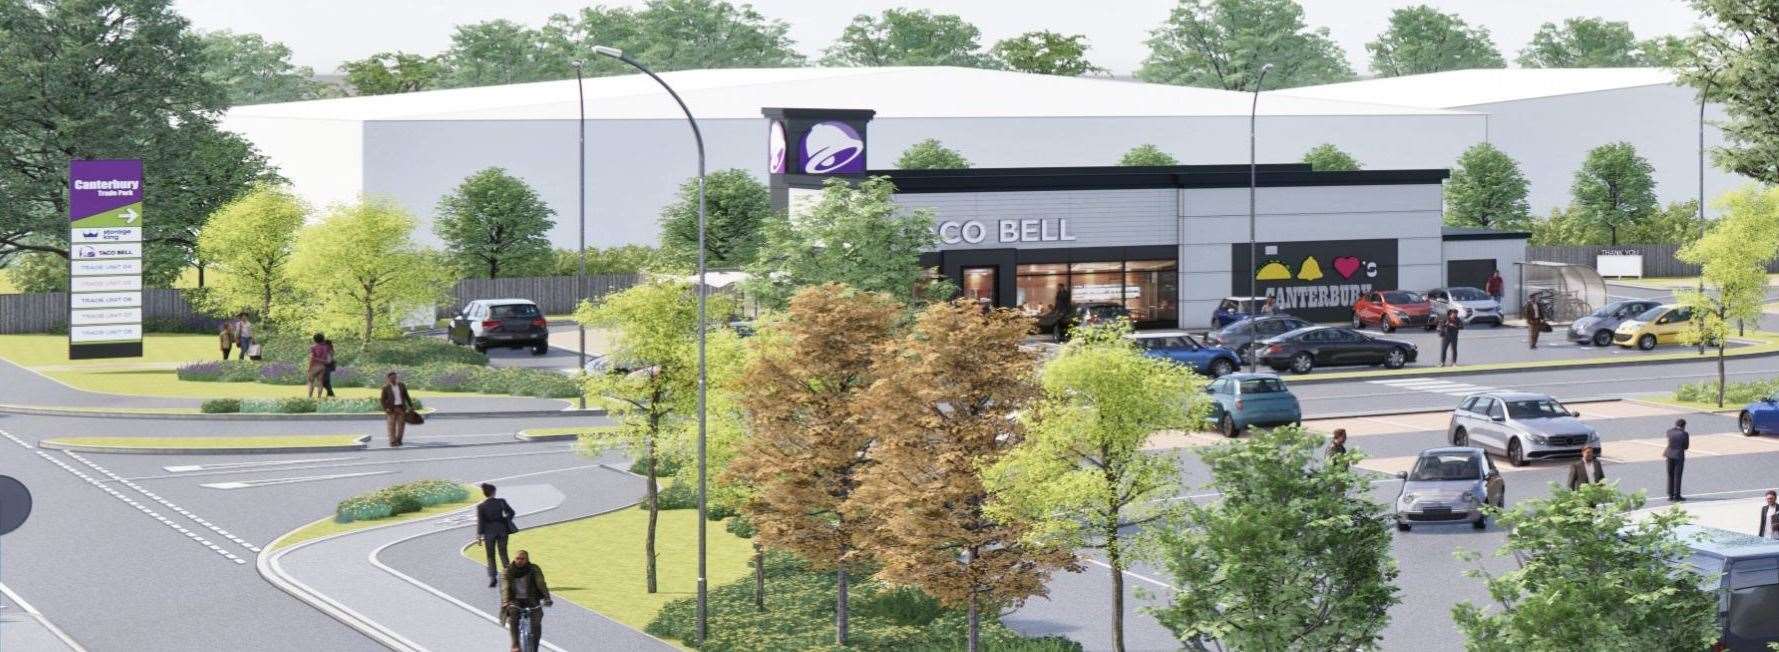 Taco Bell wants to open a drive-thru in Sturry Road, Canterbury